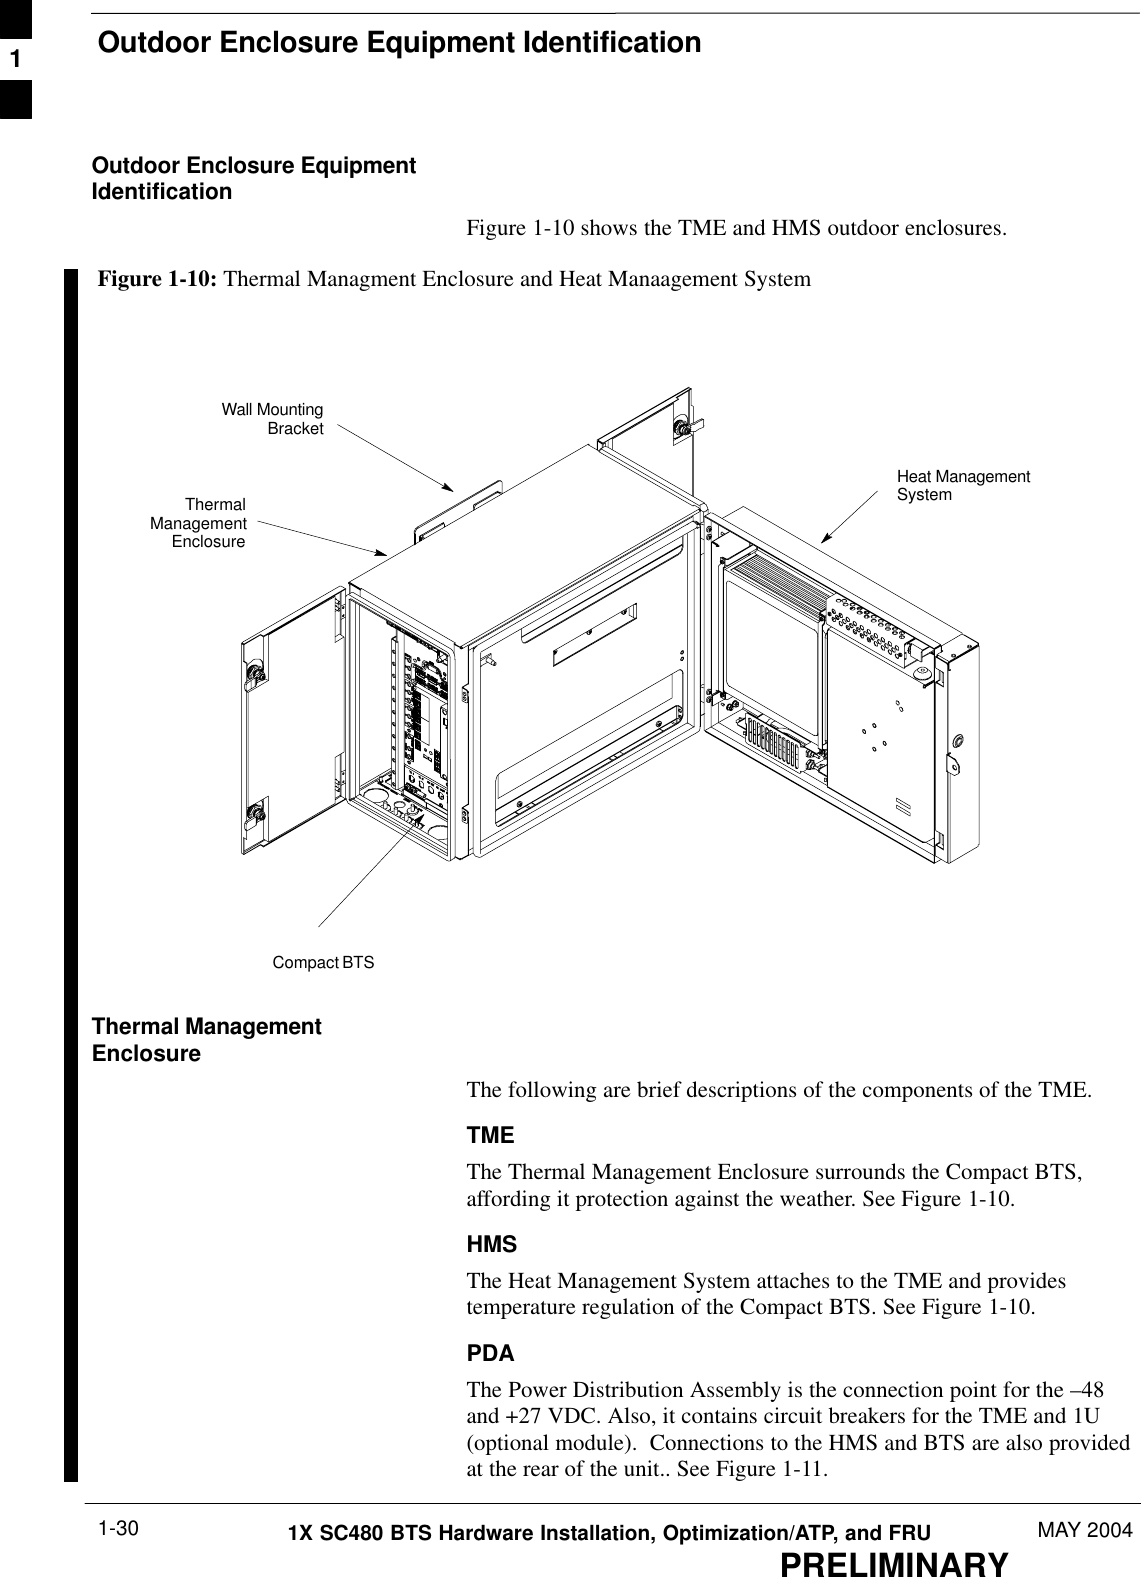 Outdoor Enclosure Equipment IdentificationPRELIMINARY1X SC480 BTS Hardware Installation, Optimization/ATP, and FRU MAY 20041-30Outdoor Enclosure EquipmentIdentificationFigure 1-10 shows the TME and HMS outdoor enclosures.Figure 1-10: Thermal Managment Enclosure and Heat Manaagement SystemThermalManagementEnclosureCompact BTSHeat ManagementSystemWall MountingBracketThermal ManagementEnclosureThe following are brief descriptions of the components of the TME.TMEThe Thermal Management Enclosure surrounds the Compact BTS,affording it protection against the weather. See Figure 1-10.HMSThe Heat Management System attaches to the TME and providestemperature regulation of the Compact BTS. See Figure 1-10.PDAThe Power Distribution Assembly is the connection point for the –48and +27 VDC. Also, it contains circuit breakers for the TME and 1U(optional module).  Connections to the HMS and BTS are also providedat the rear of the unit.. See Figure 1-11.1